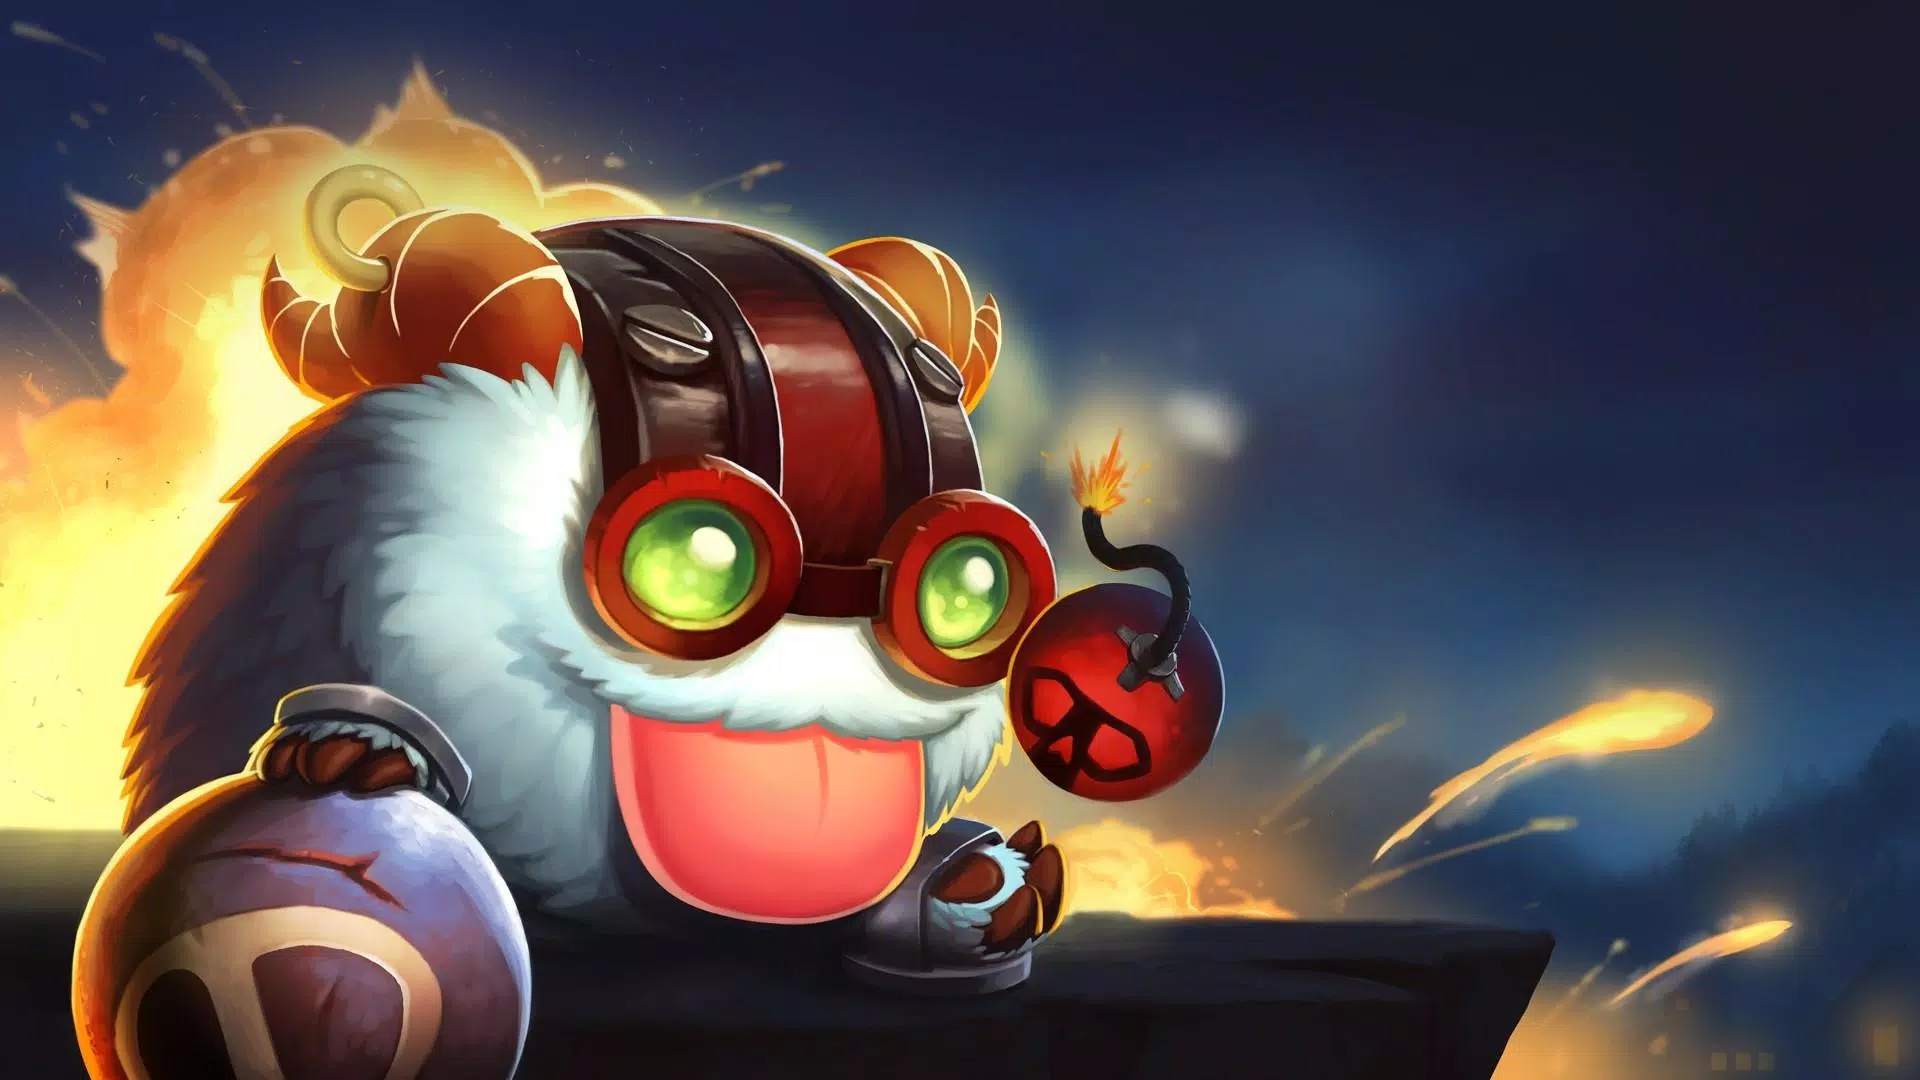 LoL League of Legends Wallpaper Pictures HD Images APK for Android Download